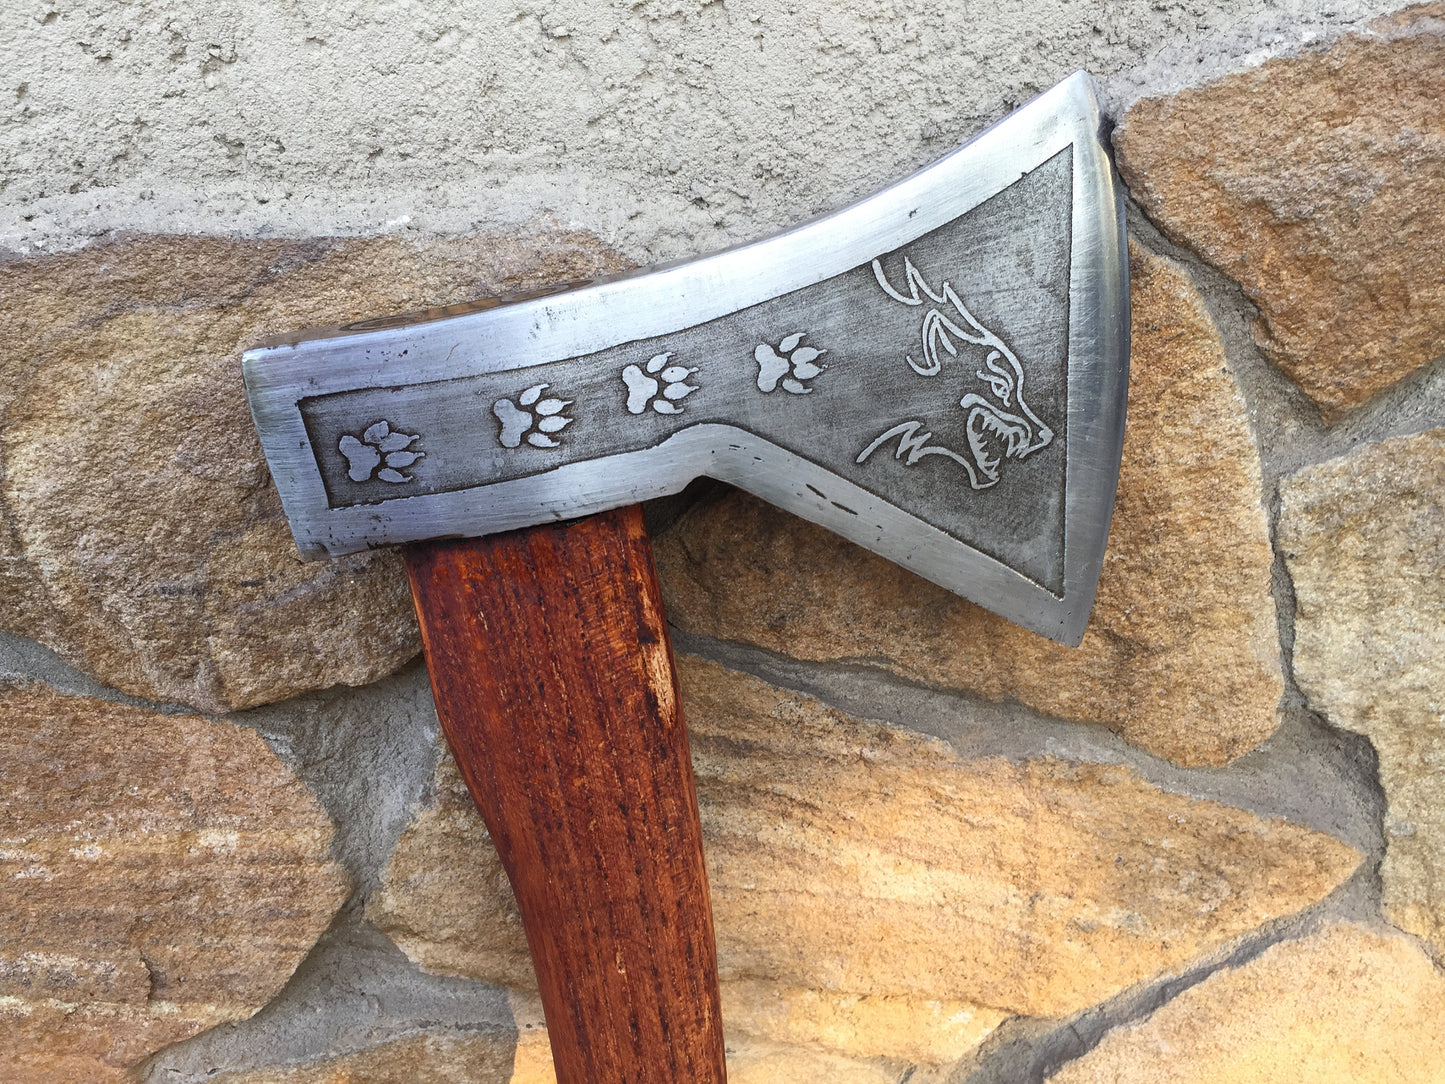 Medieval axe, viking axe, mens gifts, iron gift for him, tomahawk, hatchet, hiking, hunting, chopping axe, gifts for men, manly iron gifts